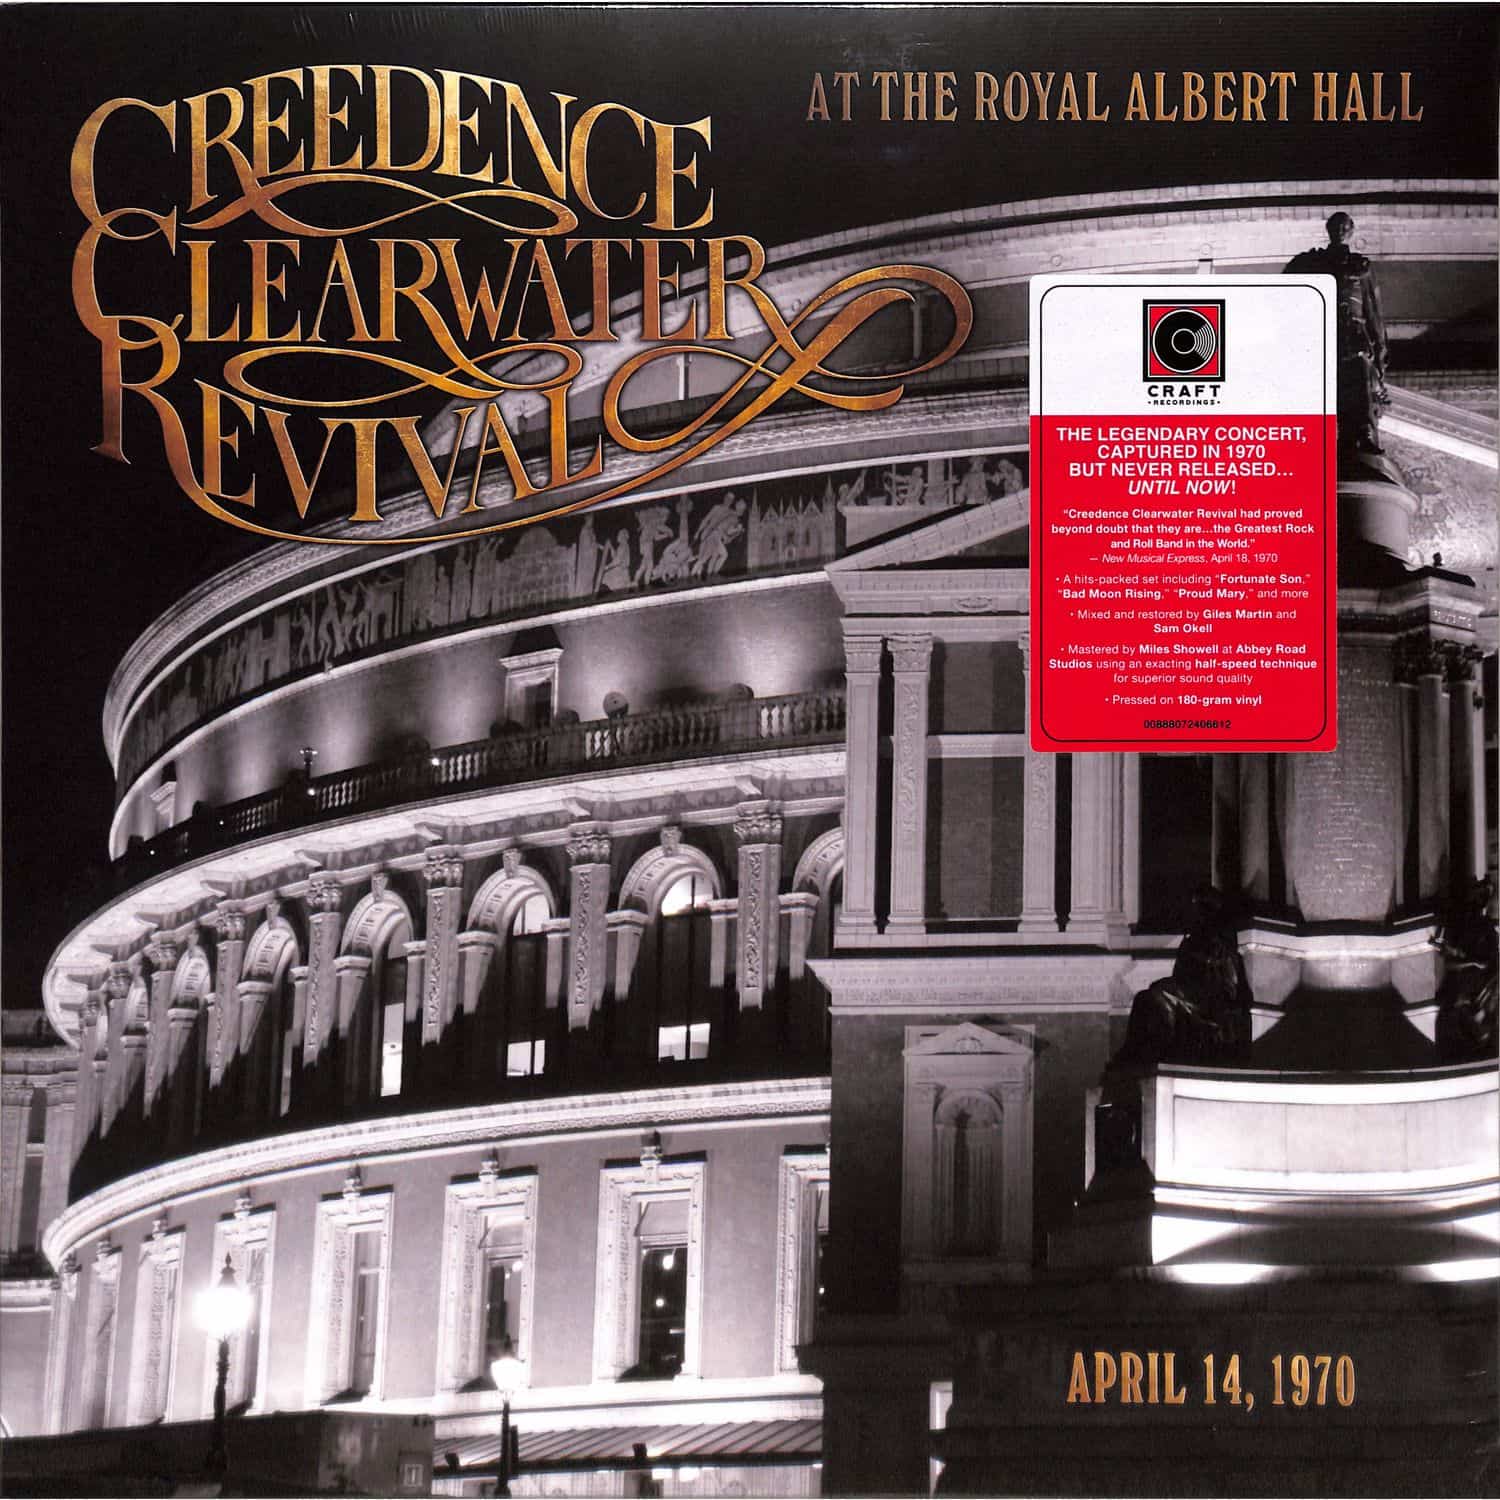 Creedence Clearwater Revival - AT THE ROYAL ALBERT HALL 